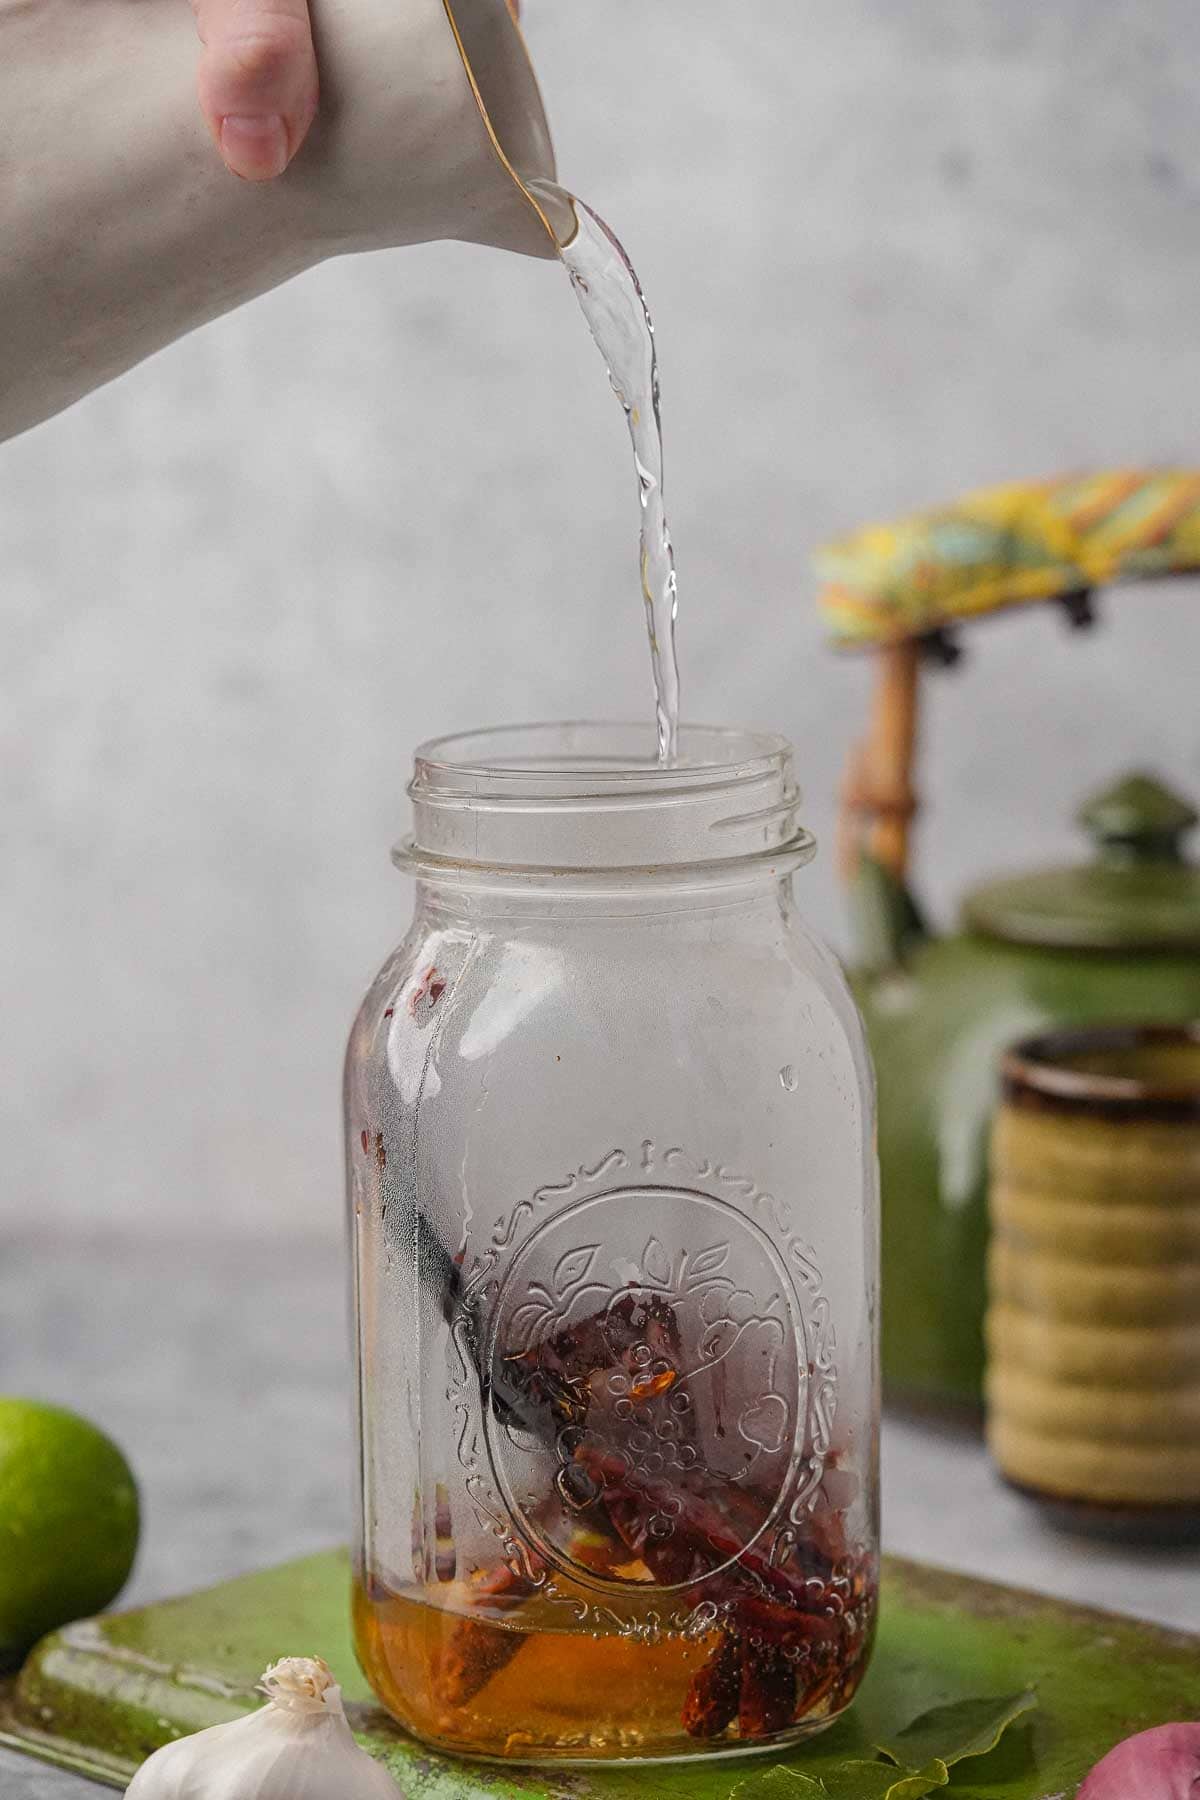 A person pouring a liquid into a mason jar filled with dried chilies.